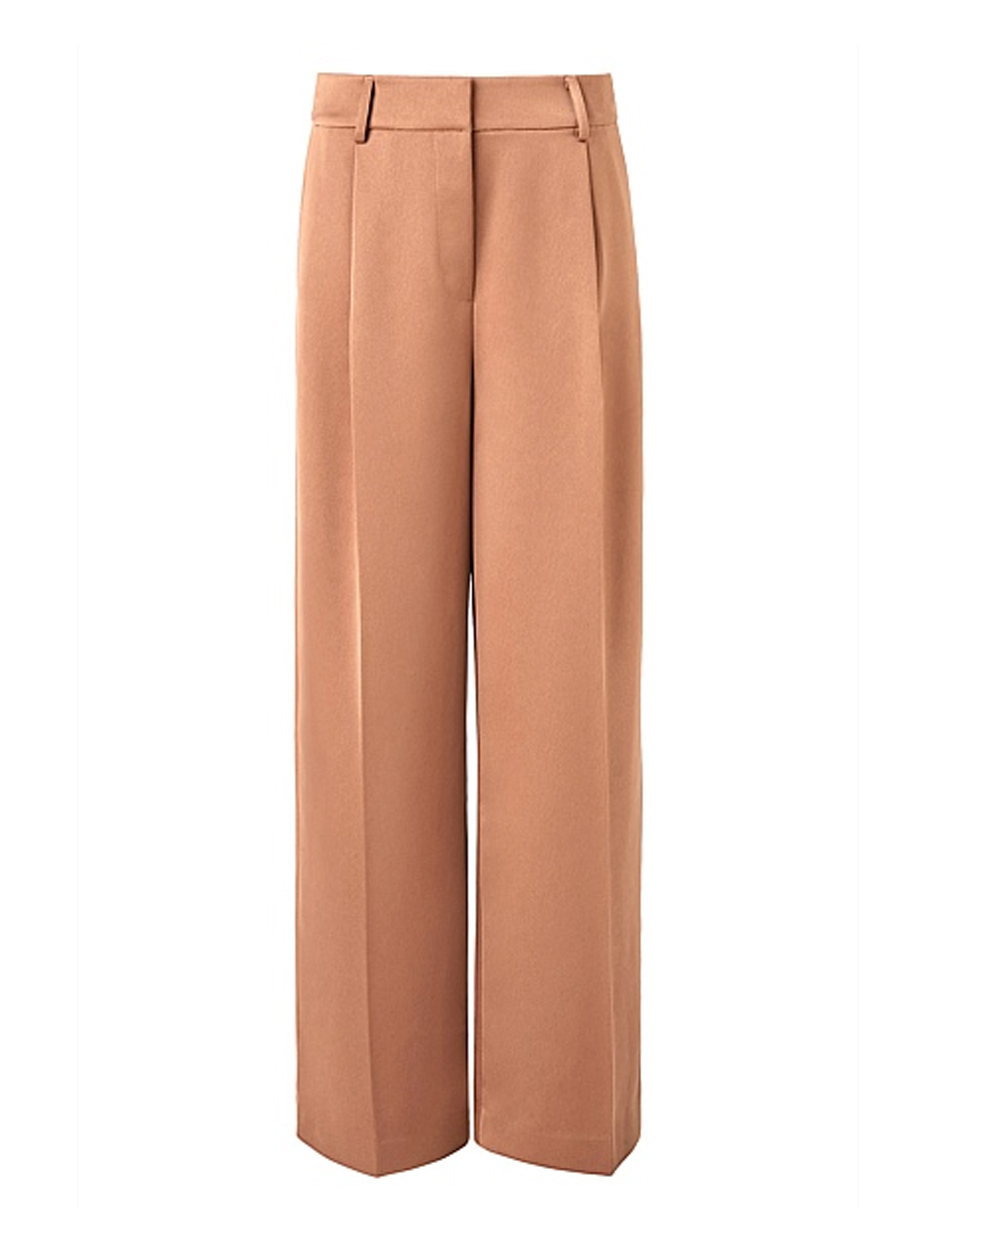 Tailored wide leg trouser, $200 from Witchery